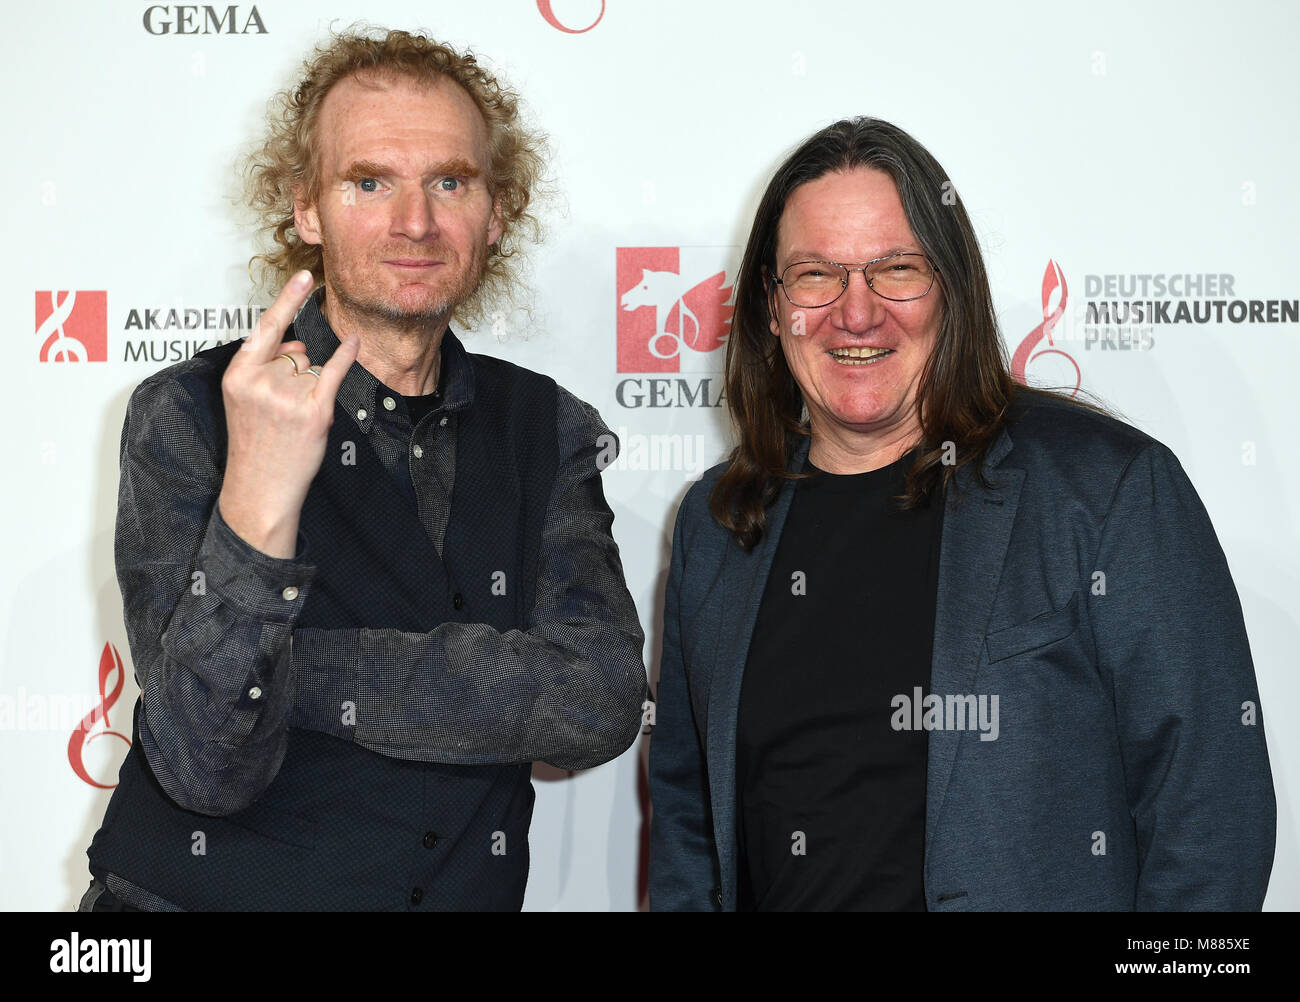 15 March 2018, Germany, Berlin: Holger Huebner (l) and Thomas Jensen,  founders of the Wacken Festival, arrive at the 10th Deutscher  Musikautorenpreis (German Music Authors' Prize) awards held by GEMA. Photo:  Britta